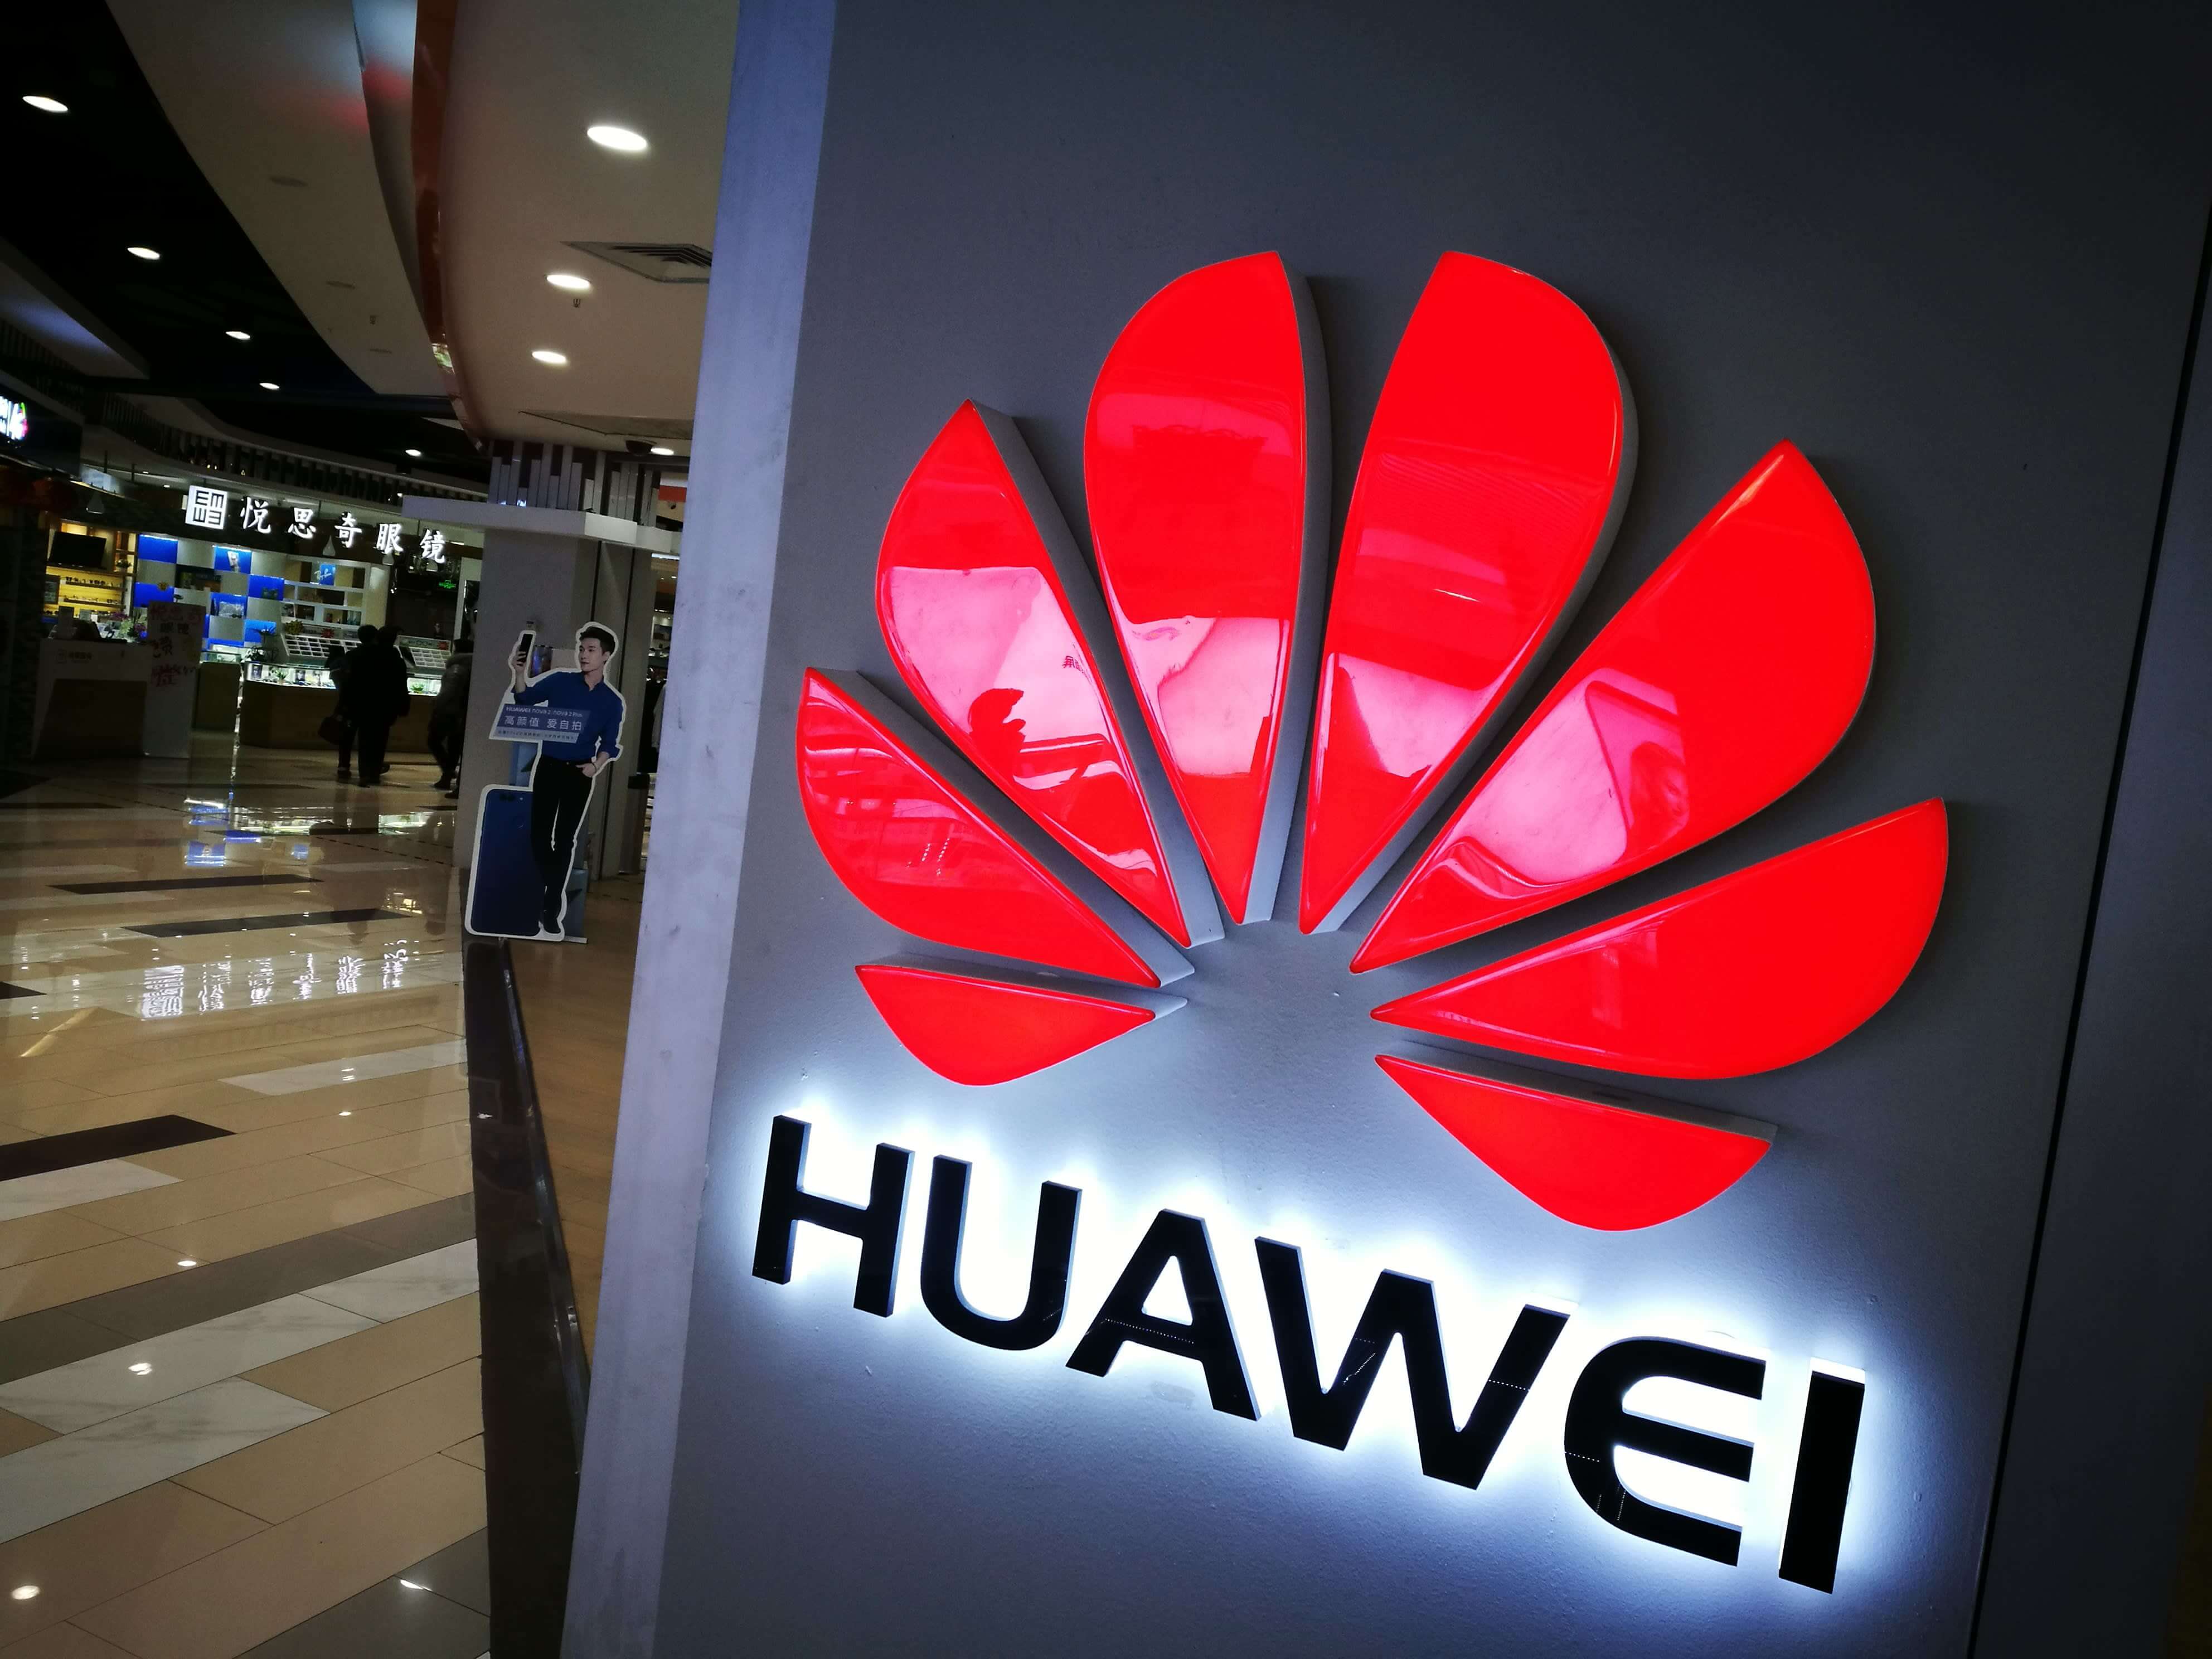 Huawei experiences strong sales growth despite US blacklisting